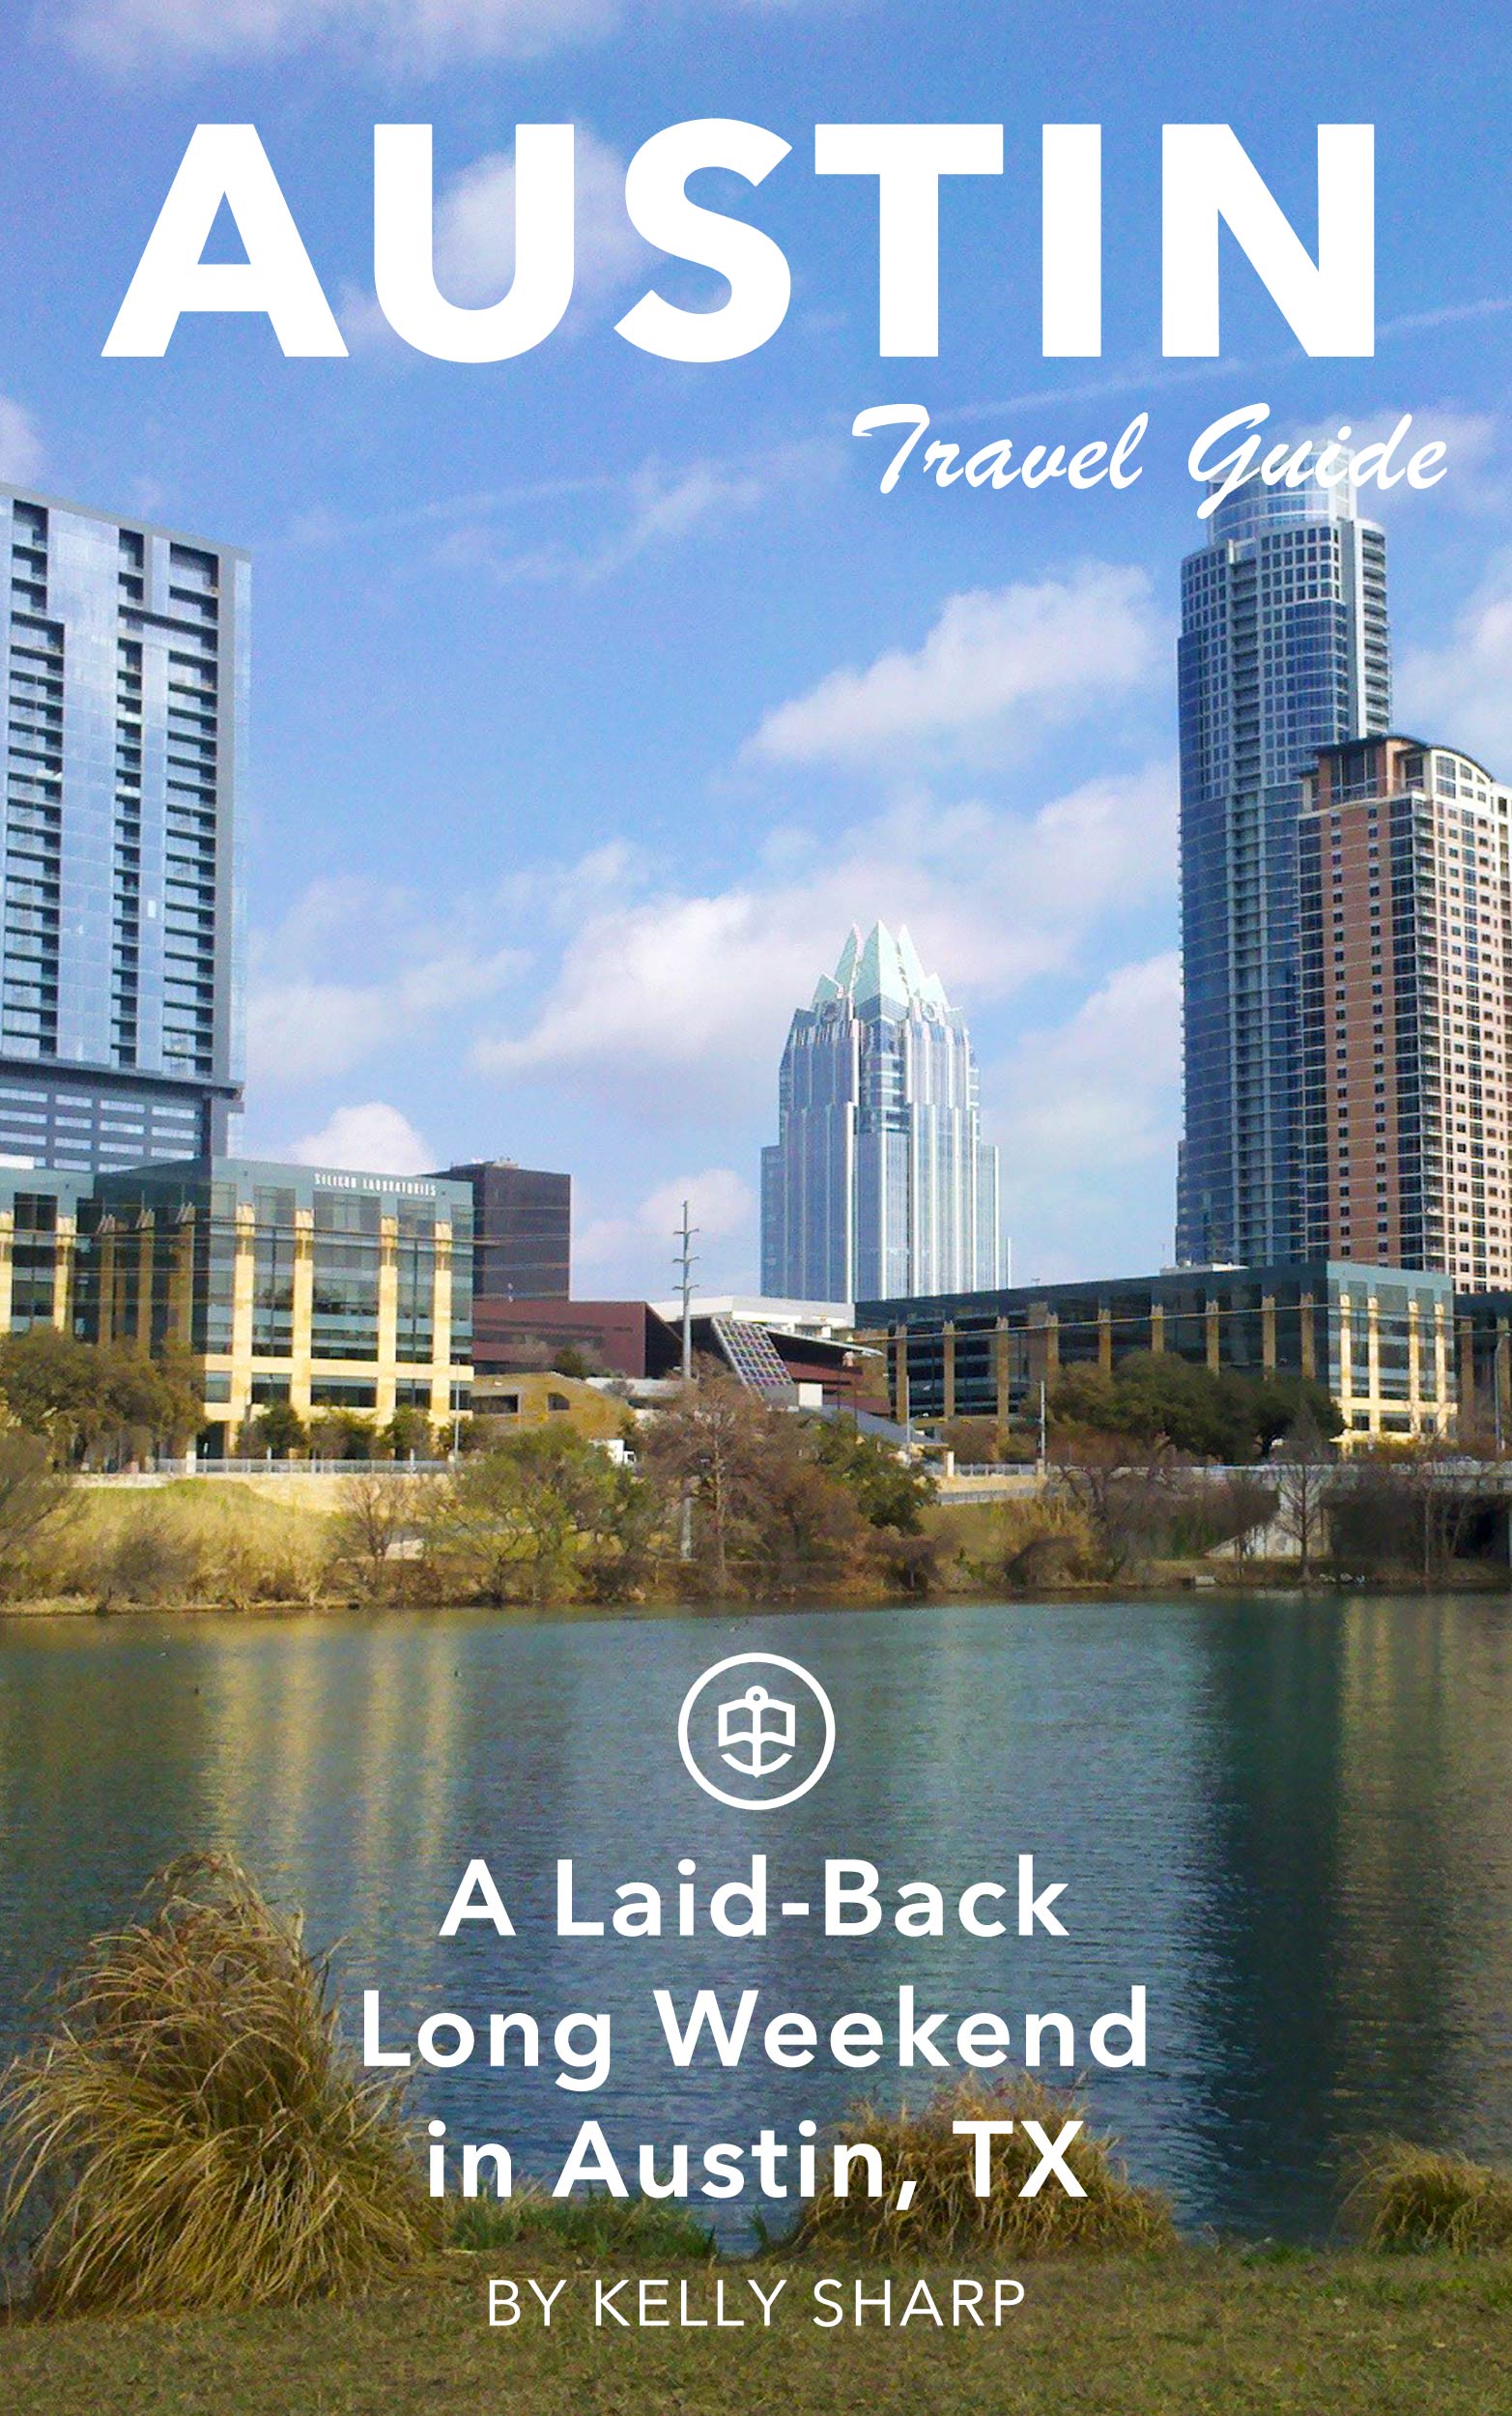 A Laid-Back Long Weekend in Austin, TX